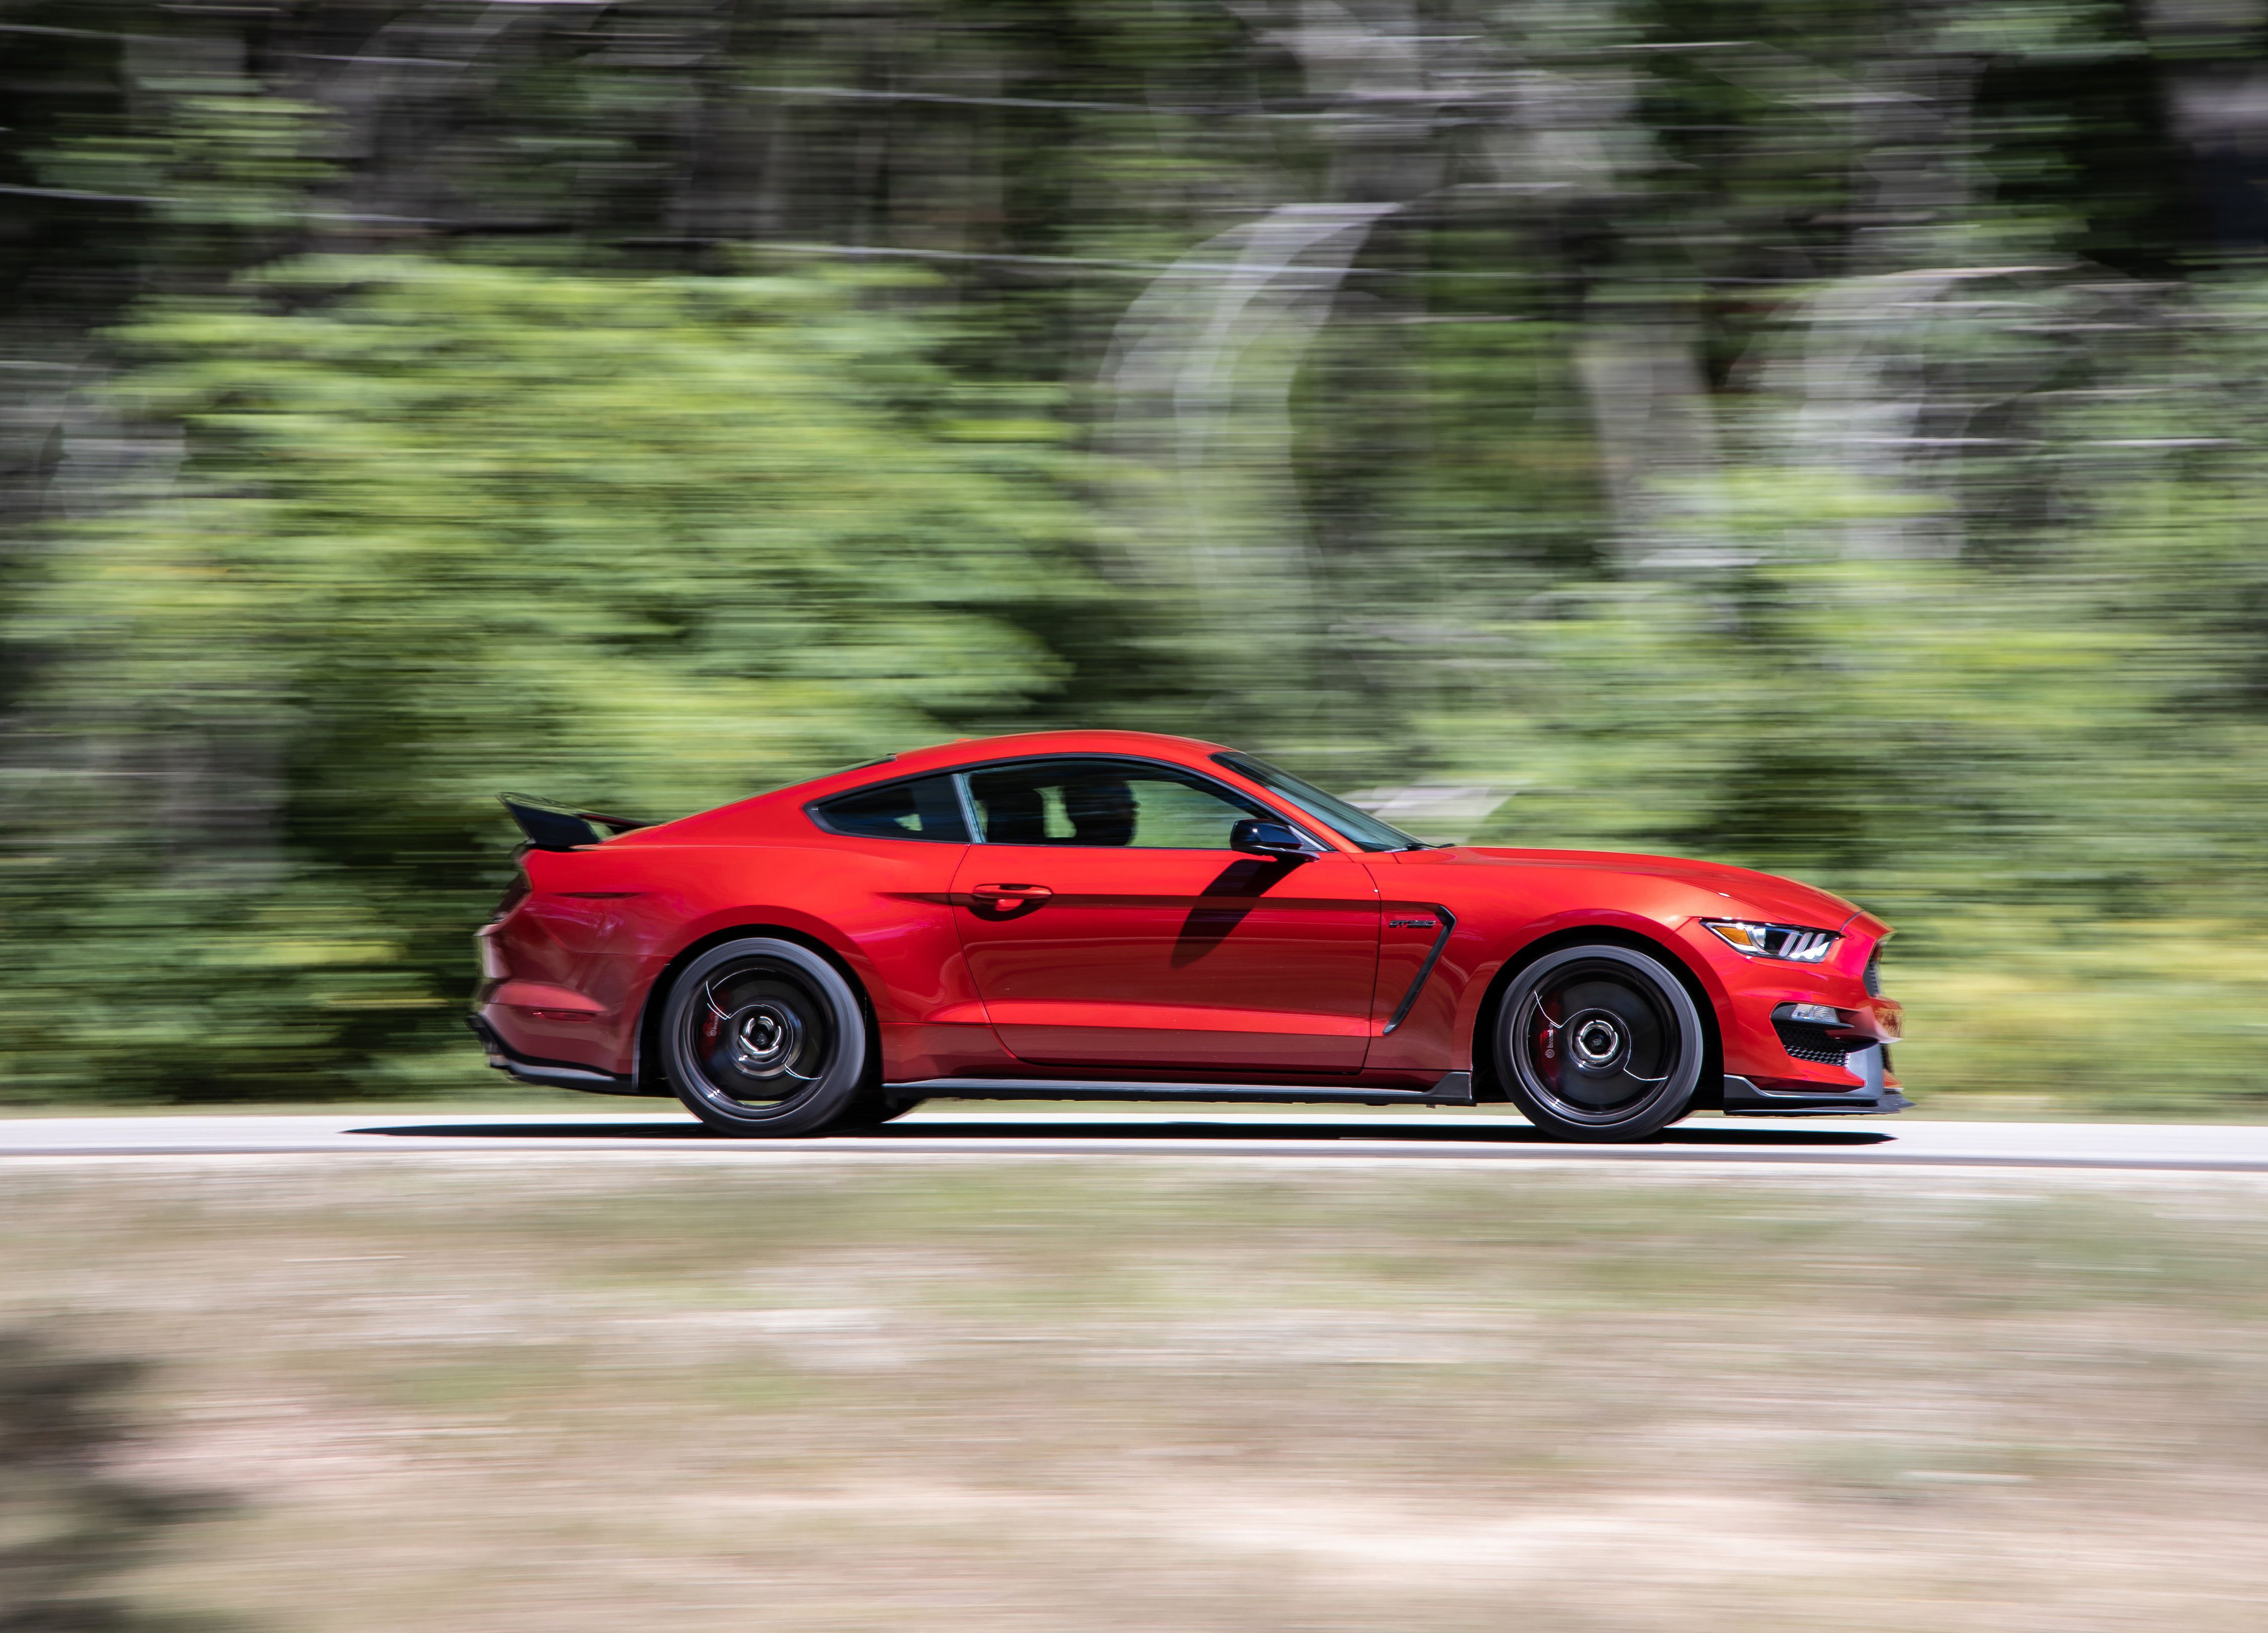 2020 Ford Mustang Shelby GT500: The sports car with loads of muscle.